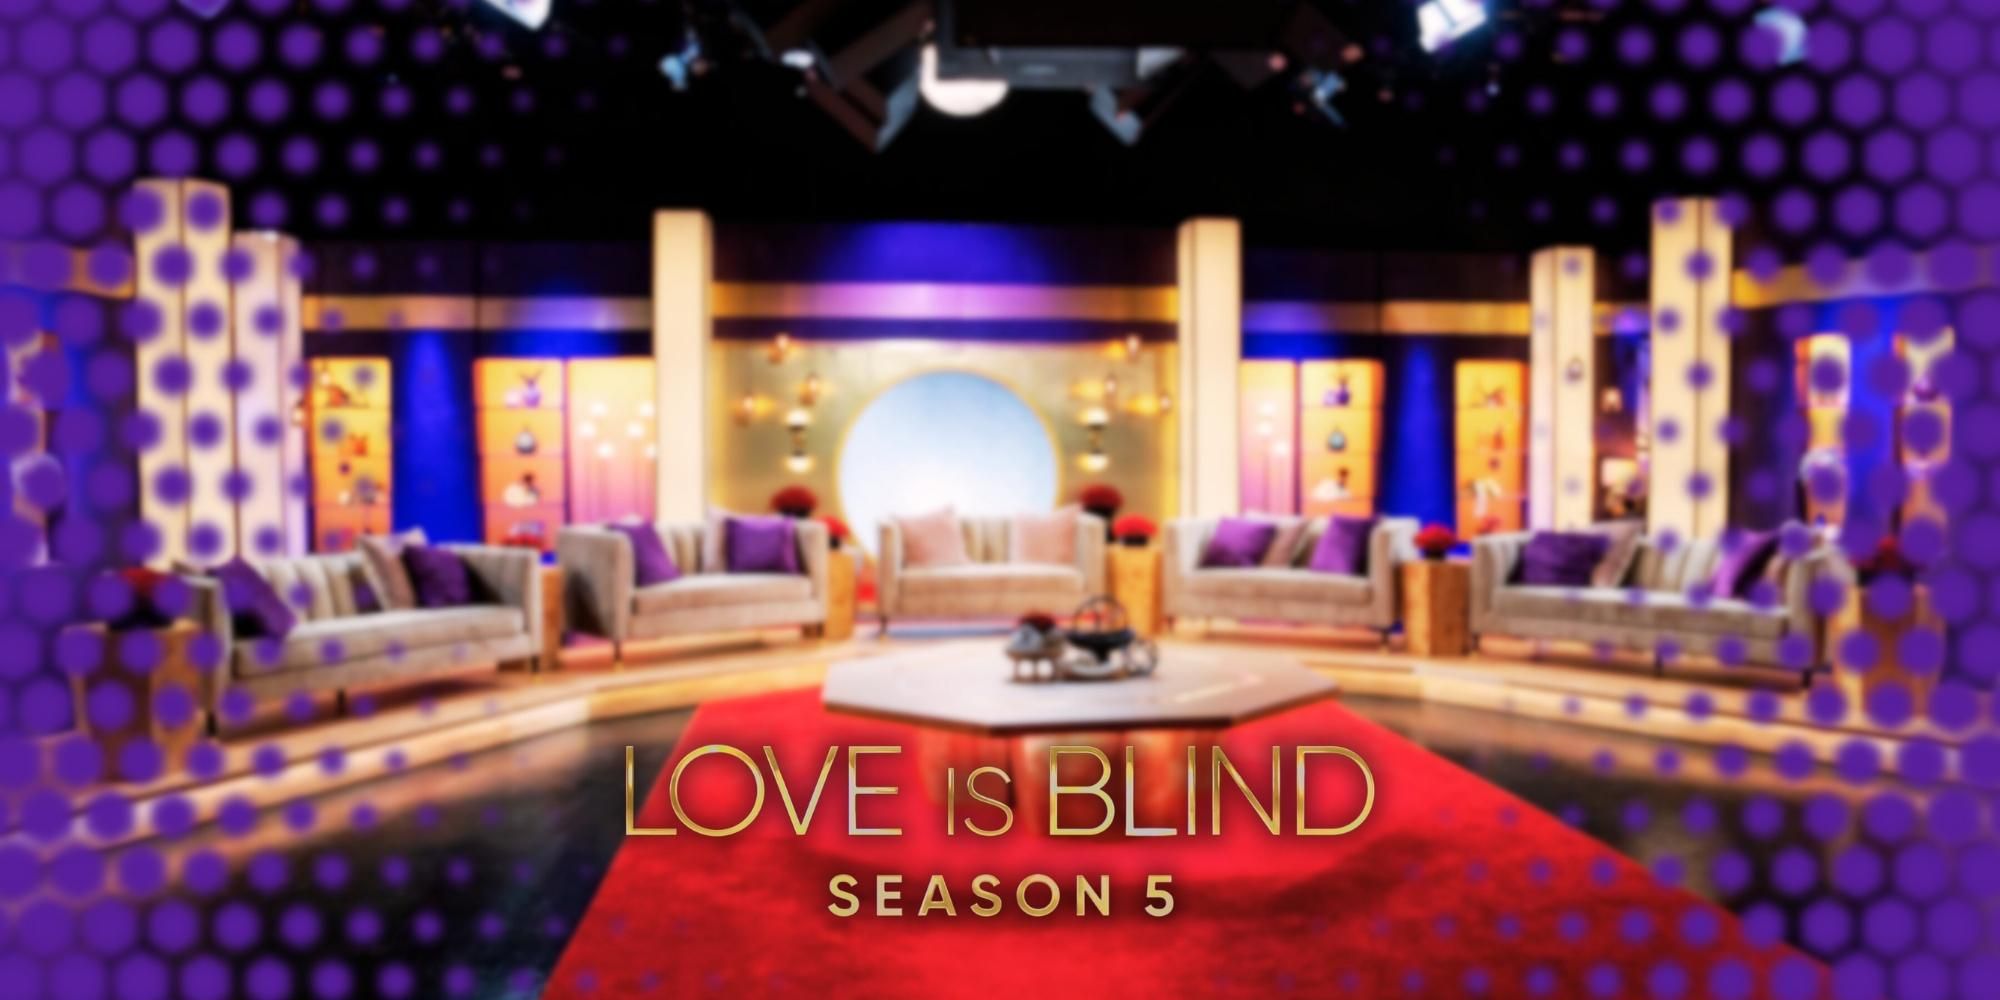 Love Is Blind Season 5 couches with logo